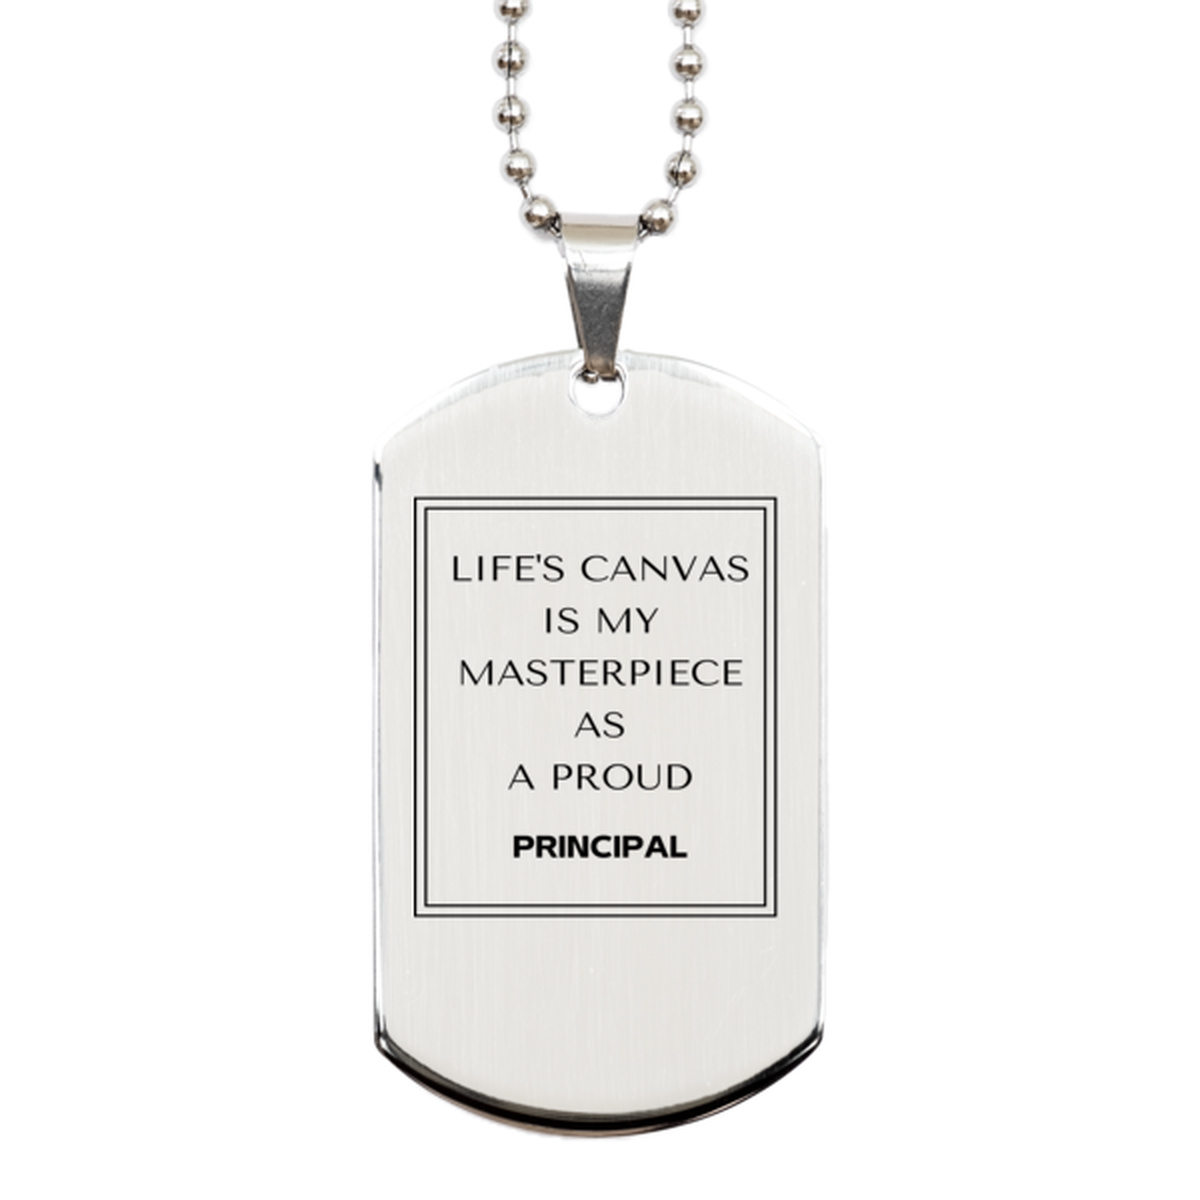 Proud Principal Gifts, Life's canvas is my masterpiece, Epic Birthday Christmas Unique Silver Dog Tag For Principal, Coworkers, Men, Women, Friends